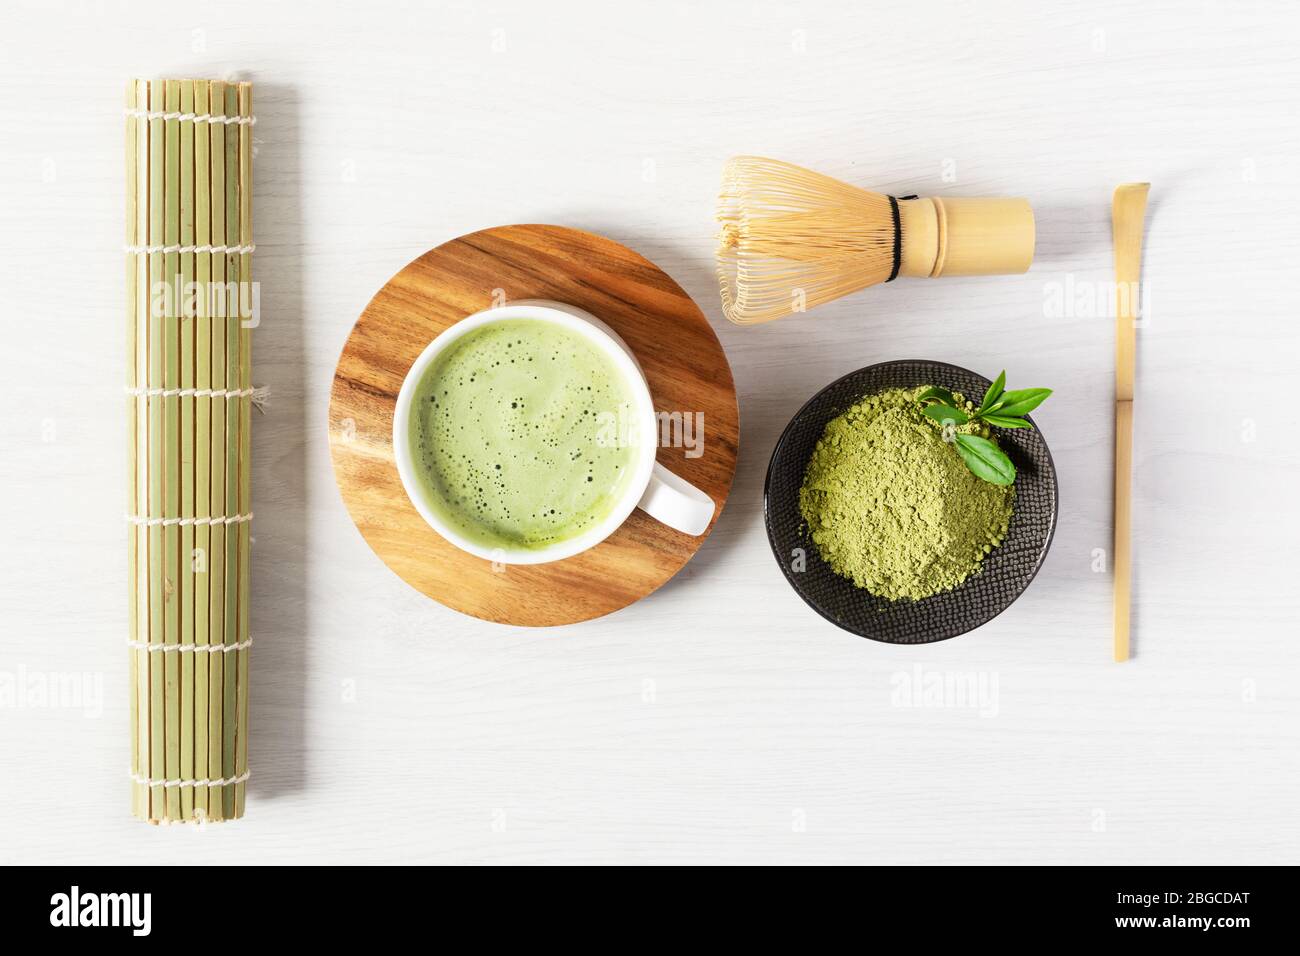 Green matcha tea latte and tea accessories on white wooden background top view. Japanese tea ceremony concept. Chashaku spoon and chasen bamboo whisk Stock Photo